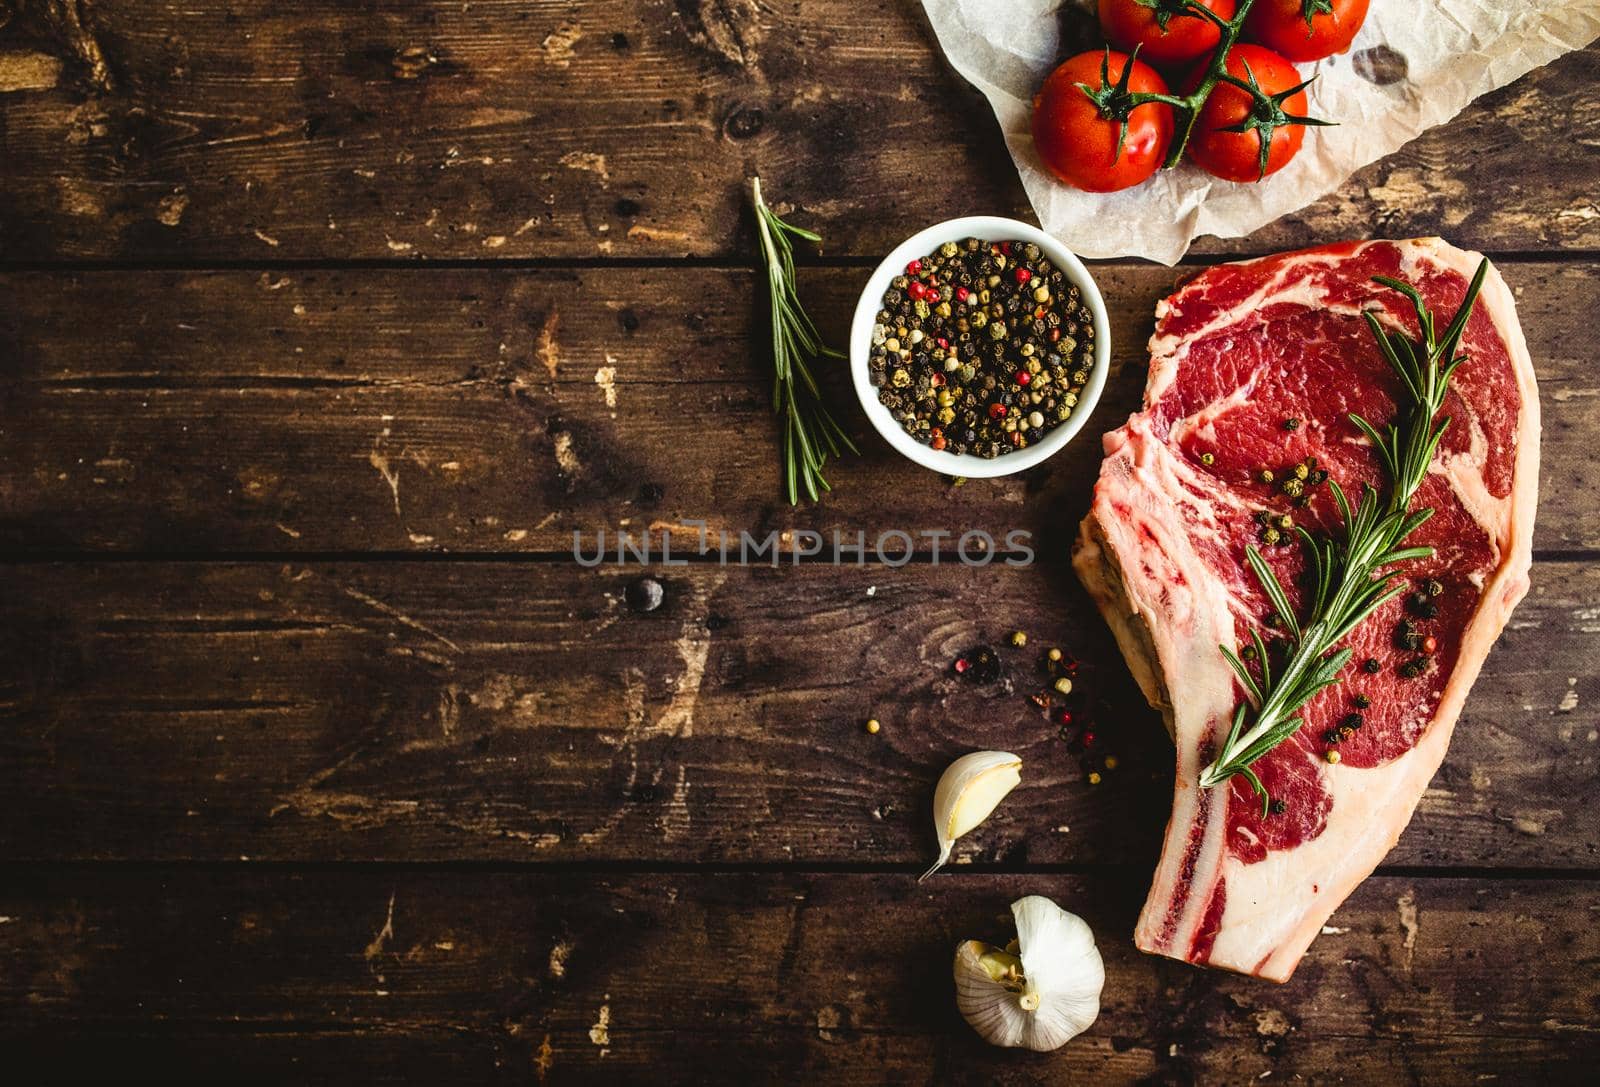 Raw marbled meat steak, pepper, herbs, tomato, old wooden background. Space for text. Beef Rib eye steak ready for cooking. Top view. Copy space. Ingredients, meat roasting. Ribeye meat steak. Closeup